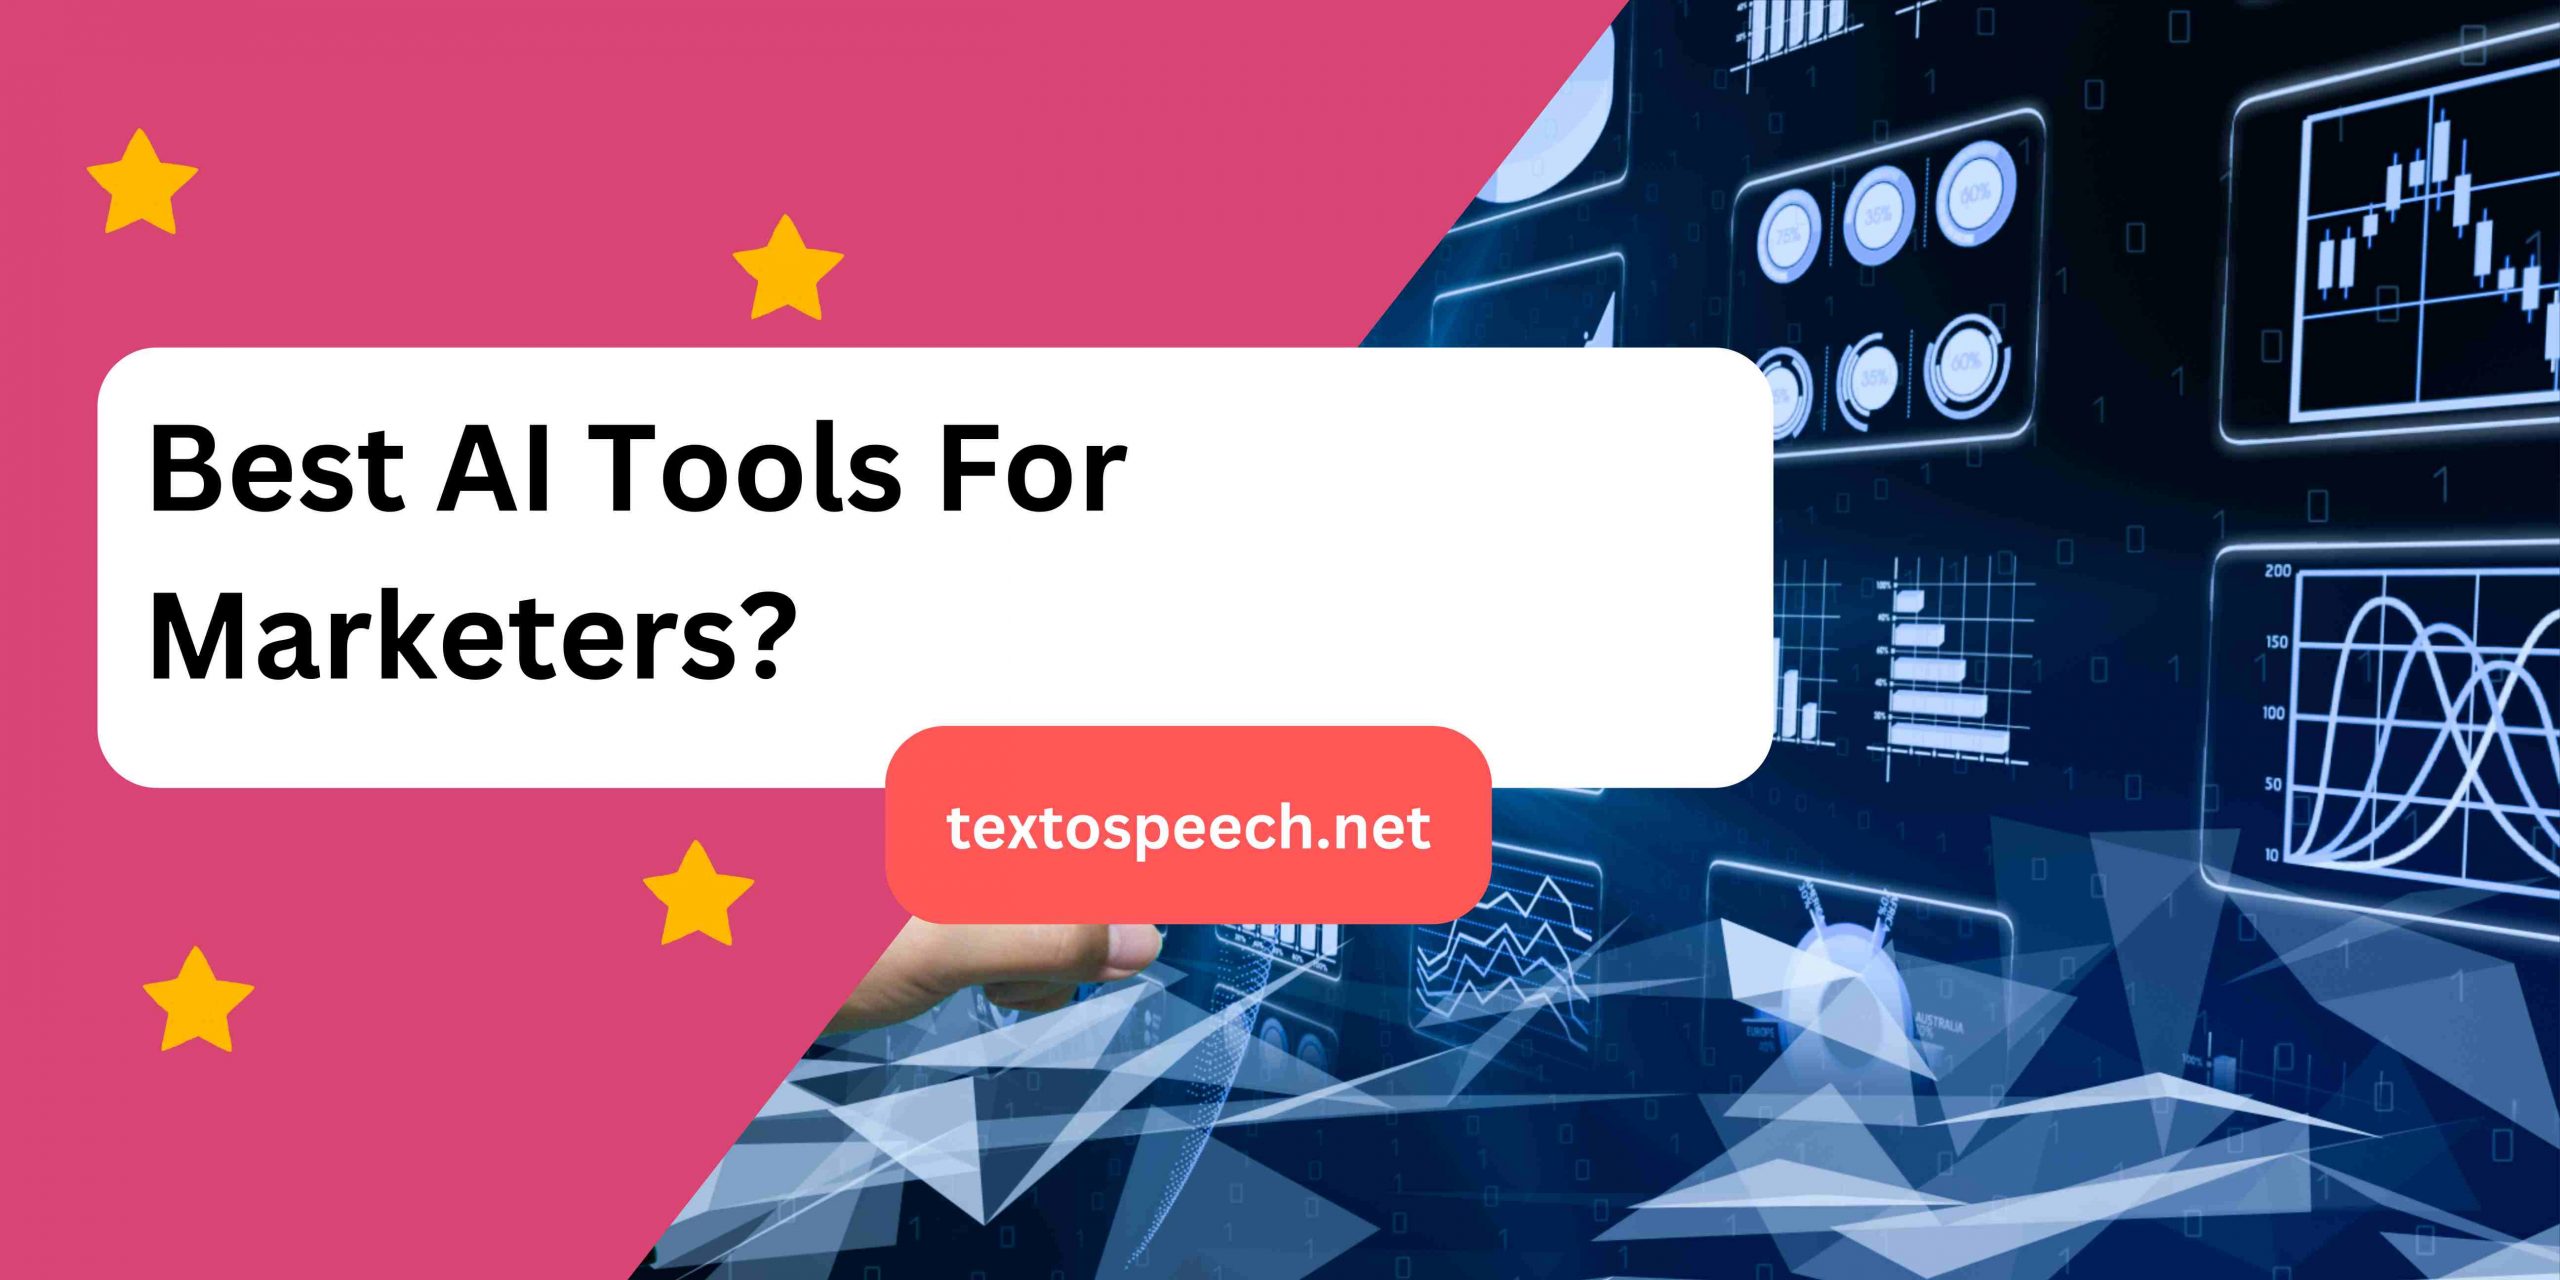 Best AI Tools For Marketers?